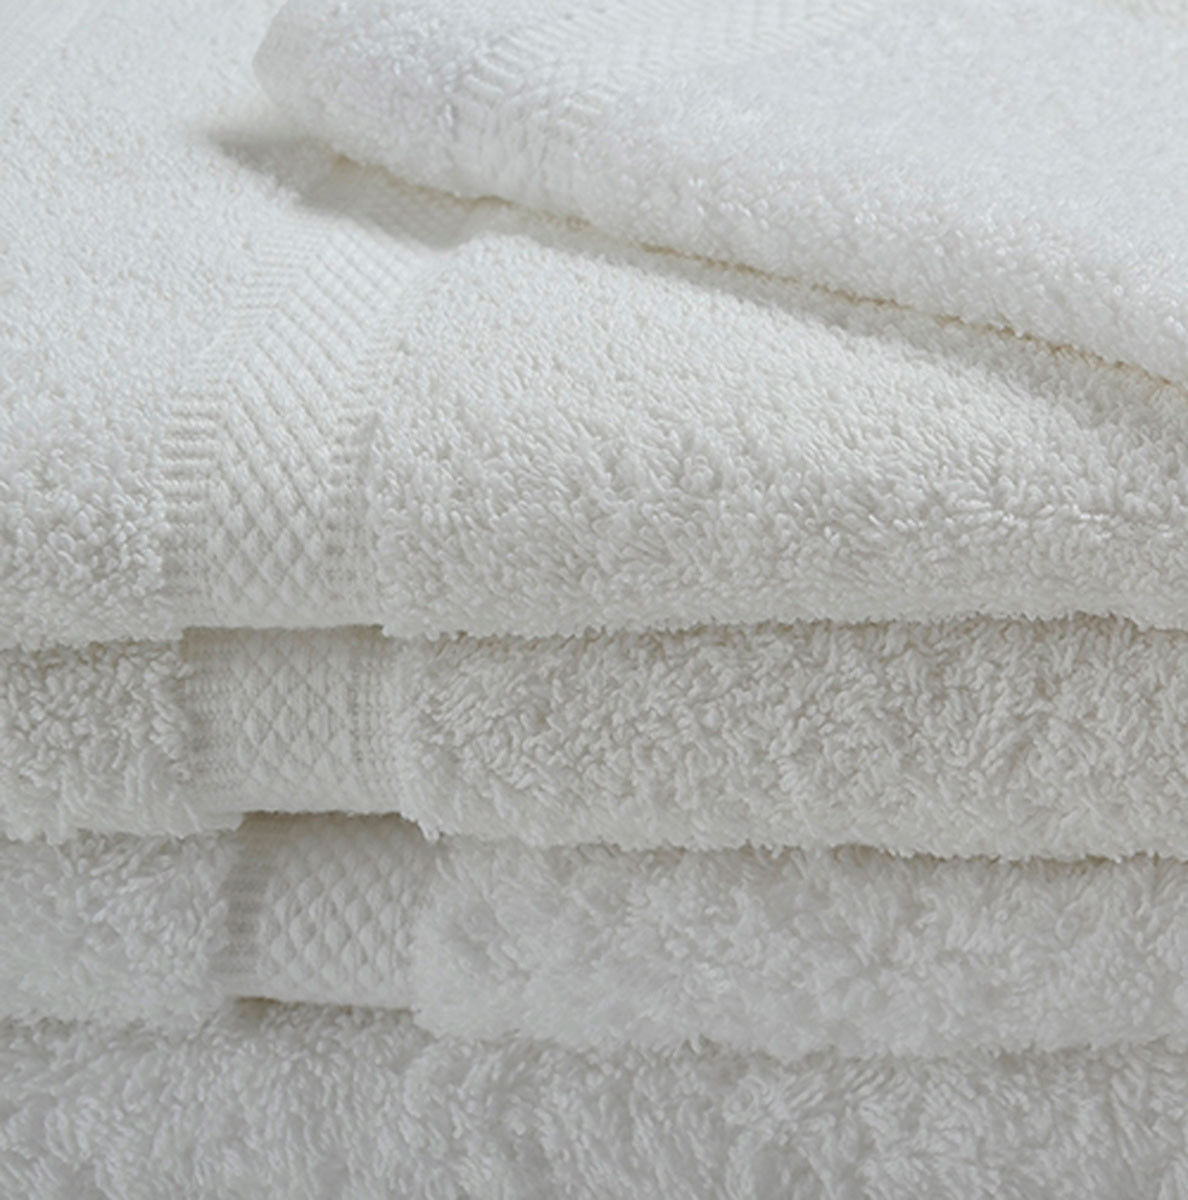 Can you confirm the color of the oxford imperiale towels from the white collection?